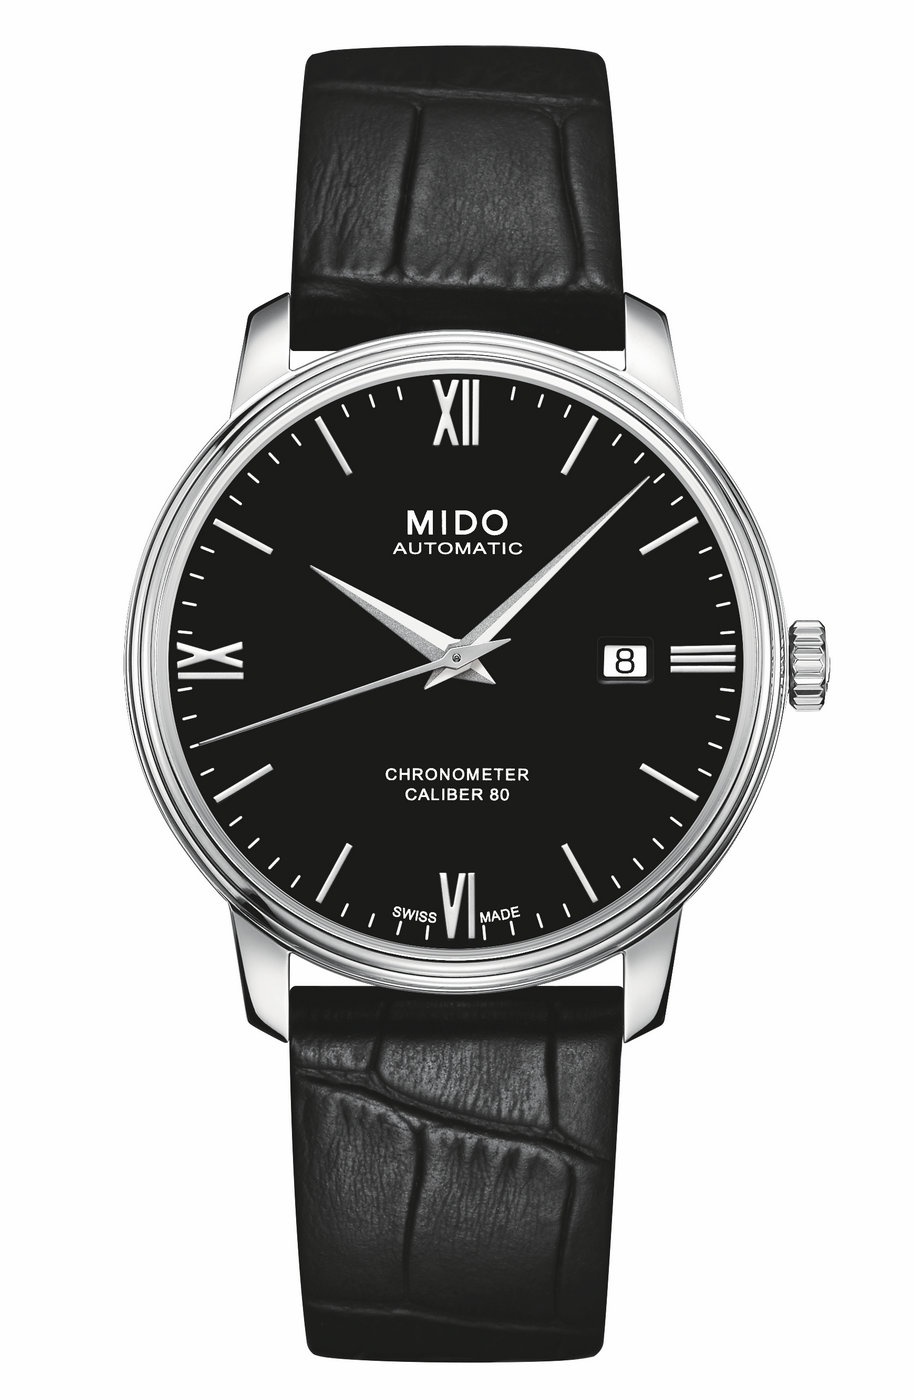 Swiss Mido Beirut Seir series watch market listed first equipped with Si Haomi Si Observatory certification Caliber 80 long kinetic energy storage watch